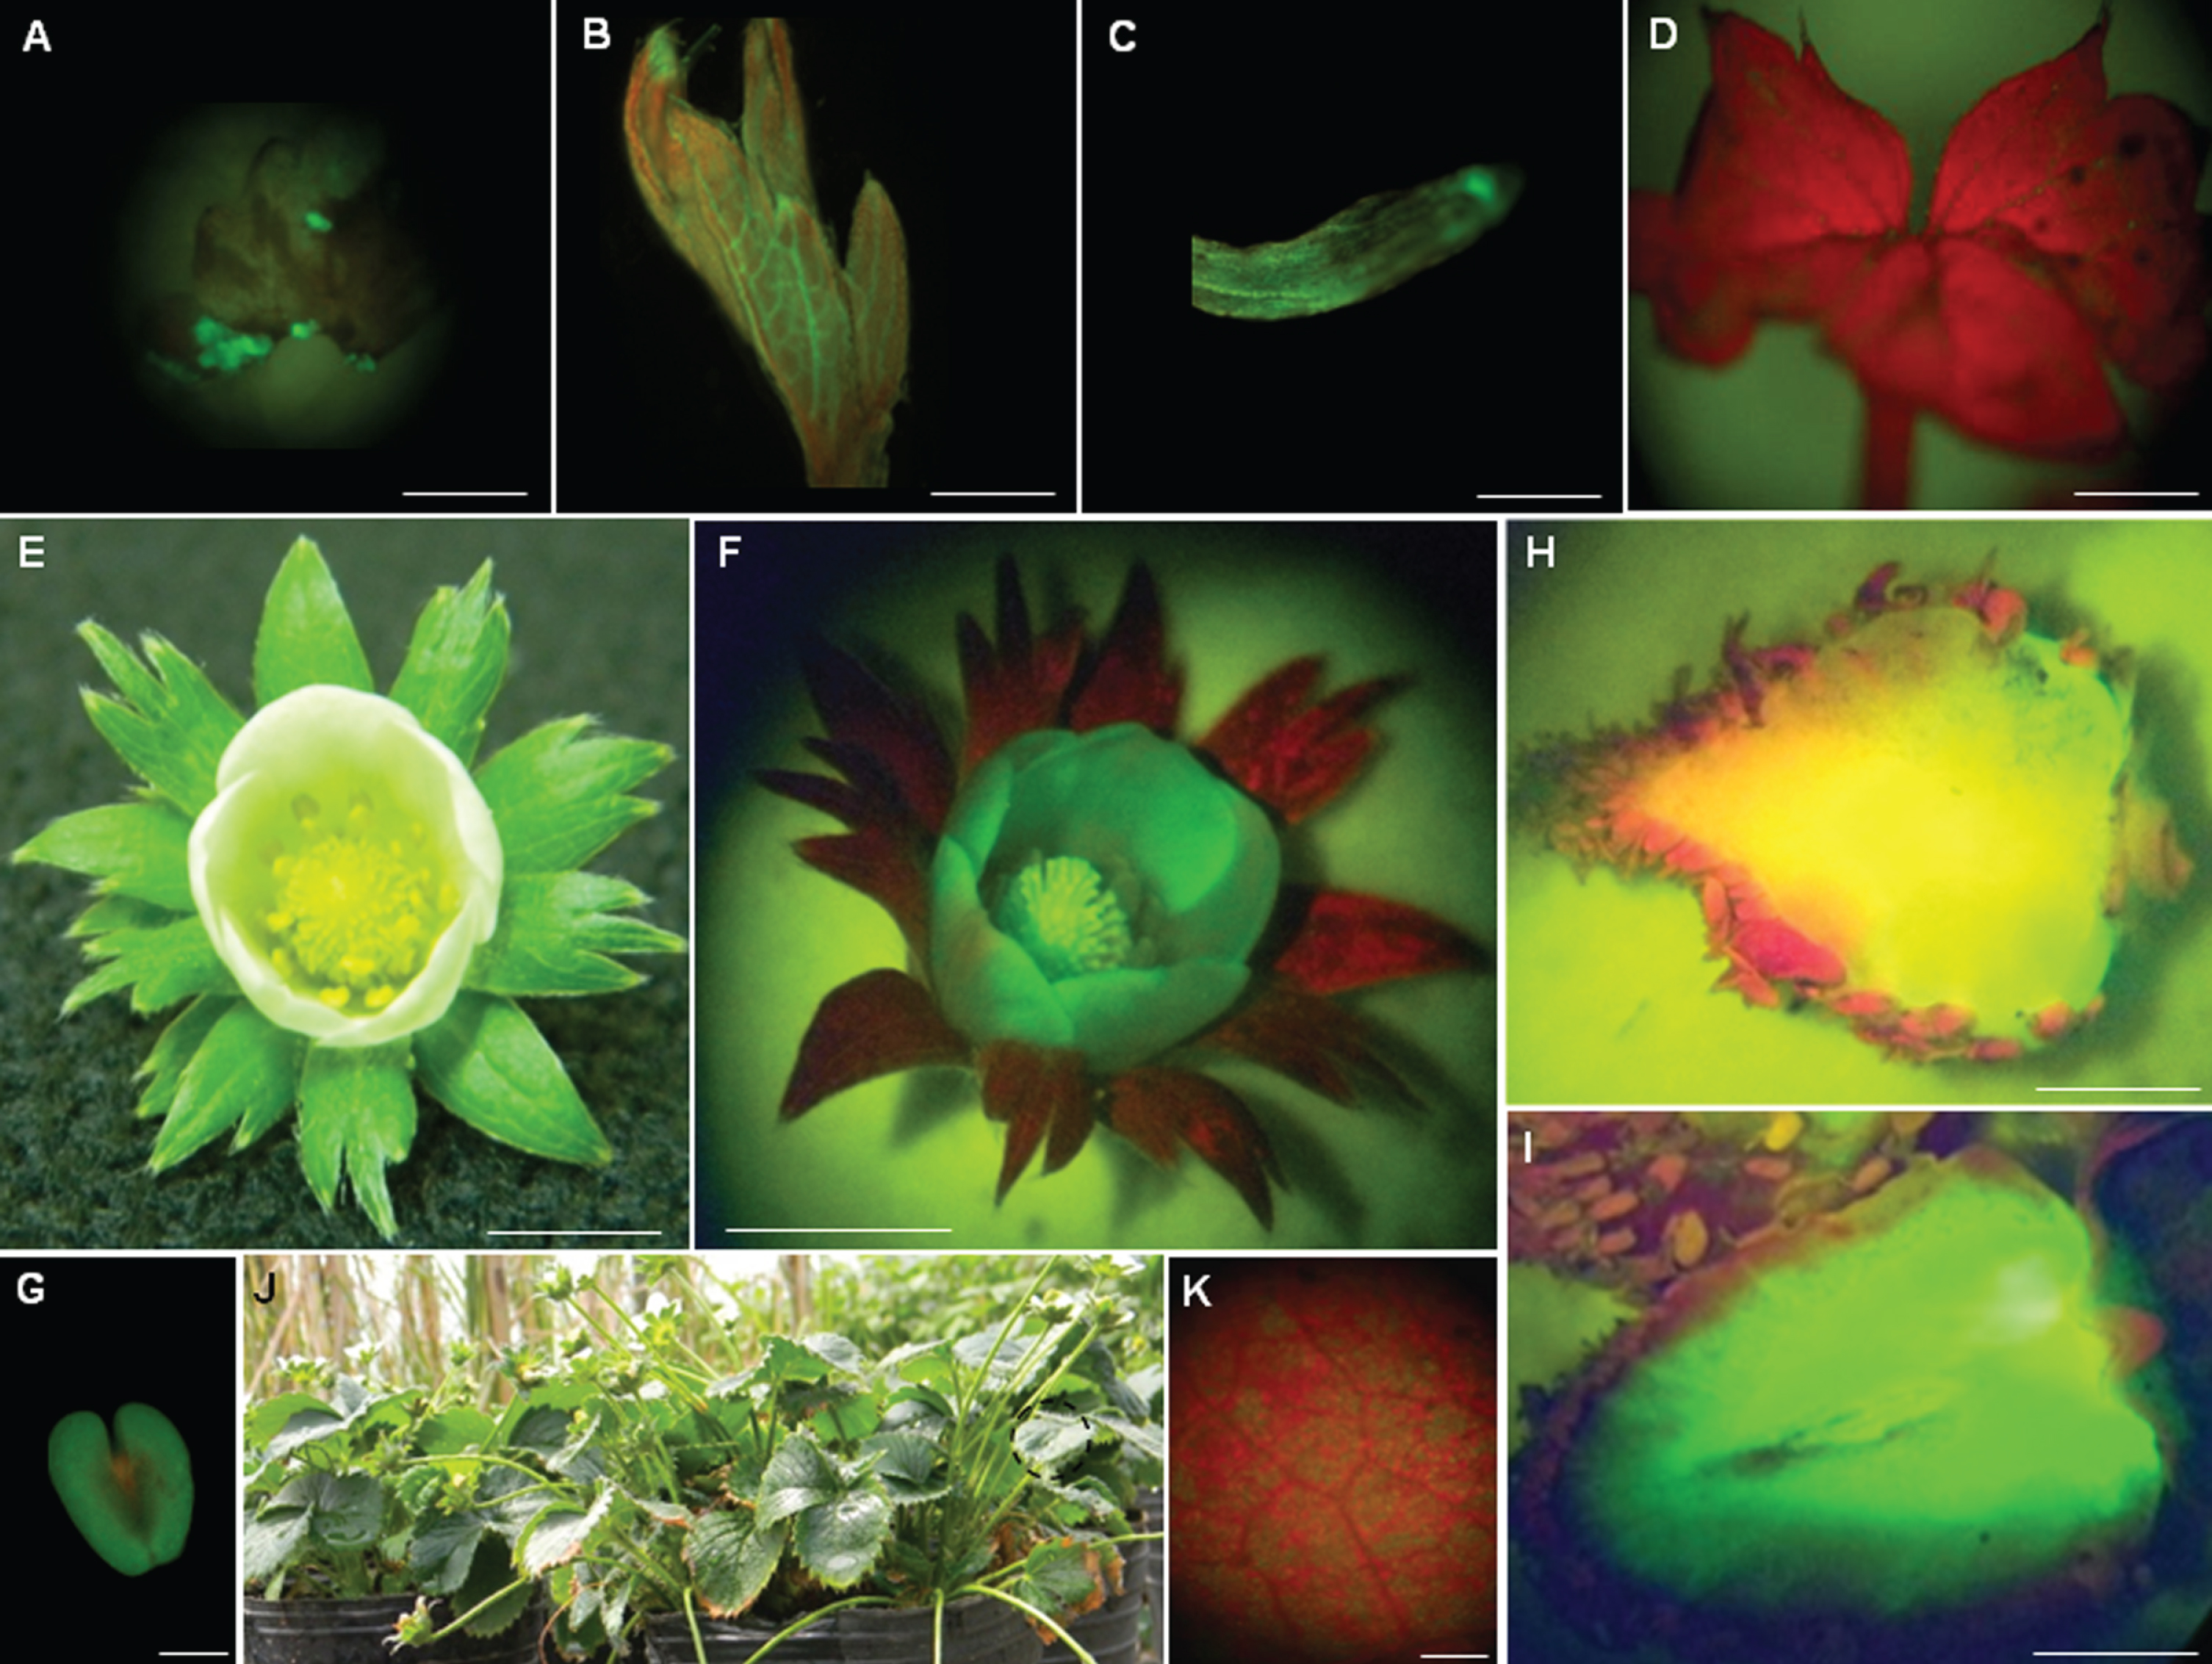 Expression of GFP protein from transformed callus to strawberry fructification. A) A transformed callus expressing GFP protein; bar = 3 mm. B) A fluorescent non-expanded leaf, bar = 3 mm; C) fluorescent root, bar = 1 mm and D) expanded non-fluorescent leaf, bar = 3 mm. Normal flower with its calyx, non-expanded petals, and numerous stamens inserted into the receptacle observed under white (E) and UV light (F); bars = 7 mm. G) A fluorescent stamen observed under UV light; bar = 1 mm. View of a longitudinally-cut white (H) and red (I) fruit observed under UV light, bars = 9 mm. J) Vegetative multiplication of stably transformed GFP strawberry plants in greenhouse. K) Foliar tissue from these plants displayed green fluorescence partially masked by red fluorescence from chlorophyll. One representative image of each developmental stadium was used for illustration.